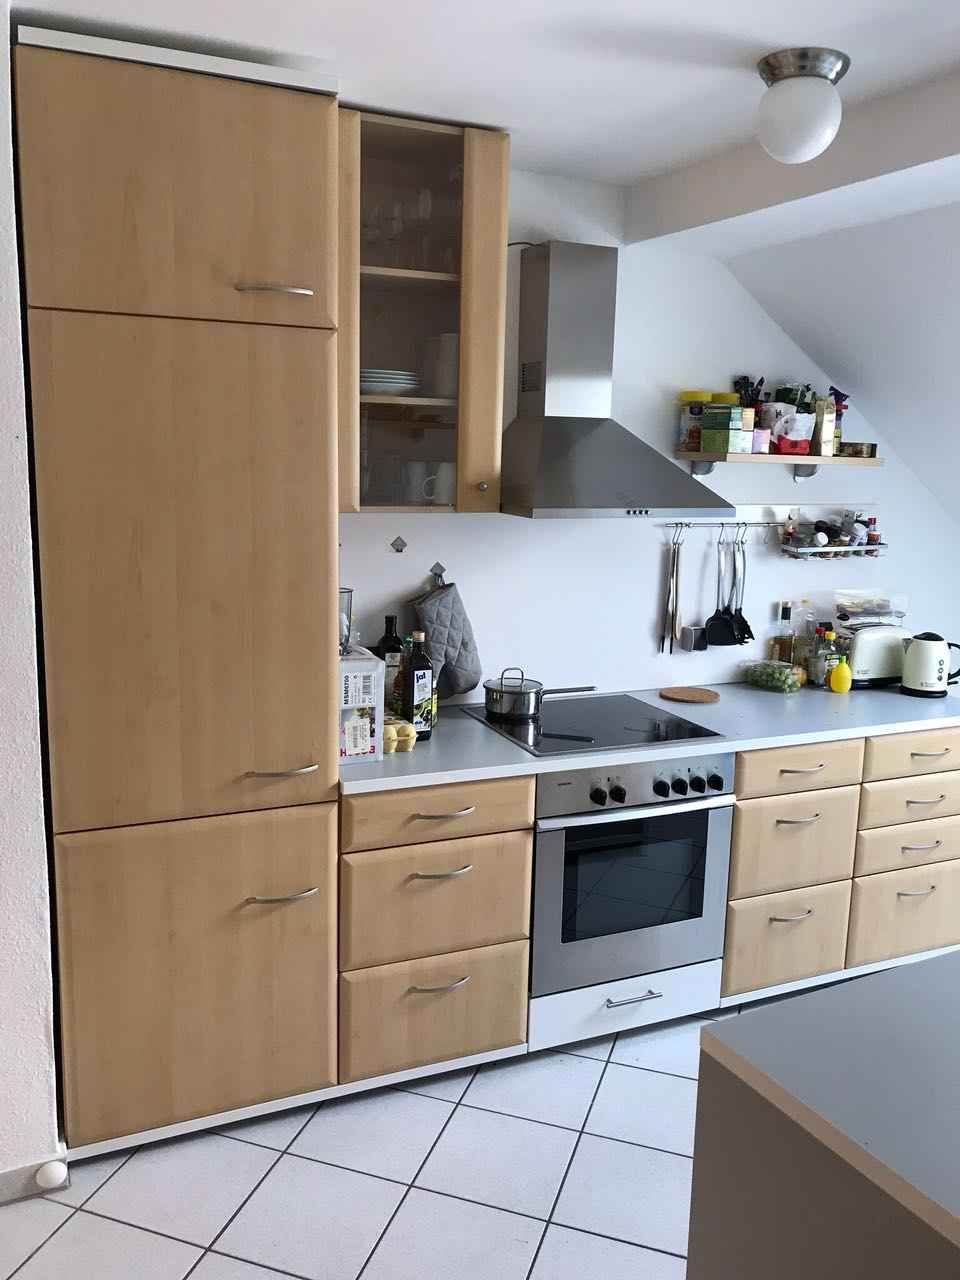 SHARED FLAT: Awesome, great apartment in Frankfurt am Main